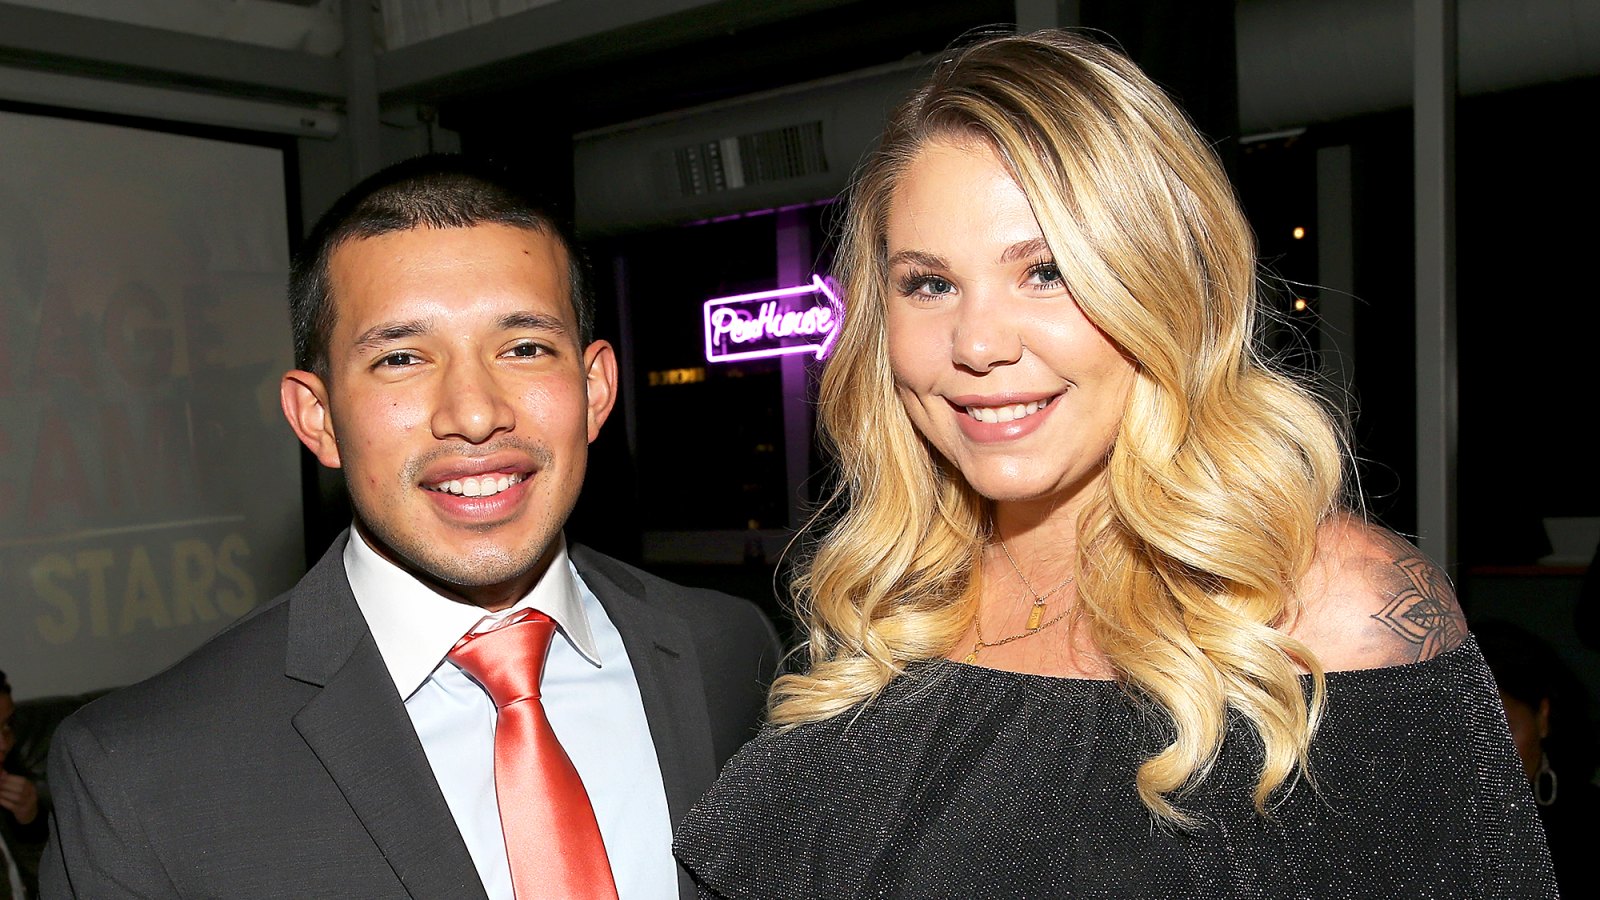 Javi Marroquin and Kailyn Lowry attend the exclusive premiere party for Marriage Boot Camp Reality Stars Season 9 hosted by WE tv on October 12, 2017 in New York City.